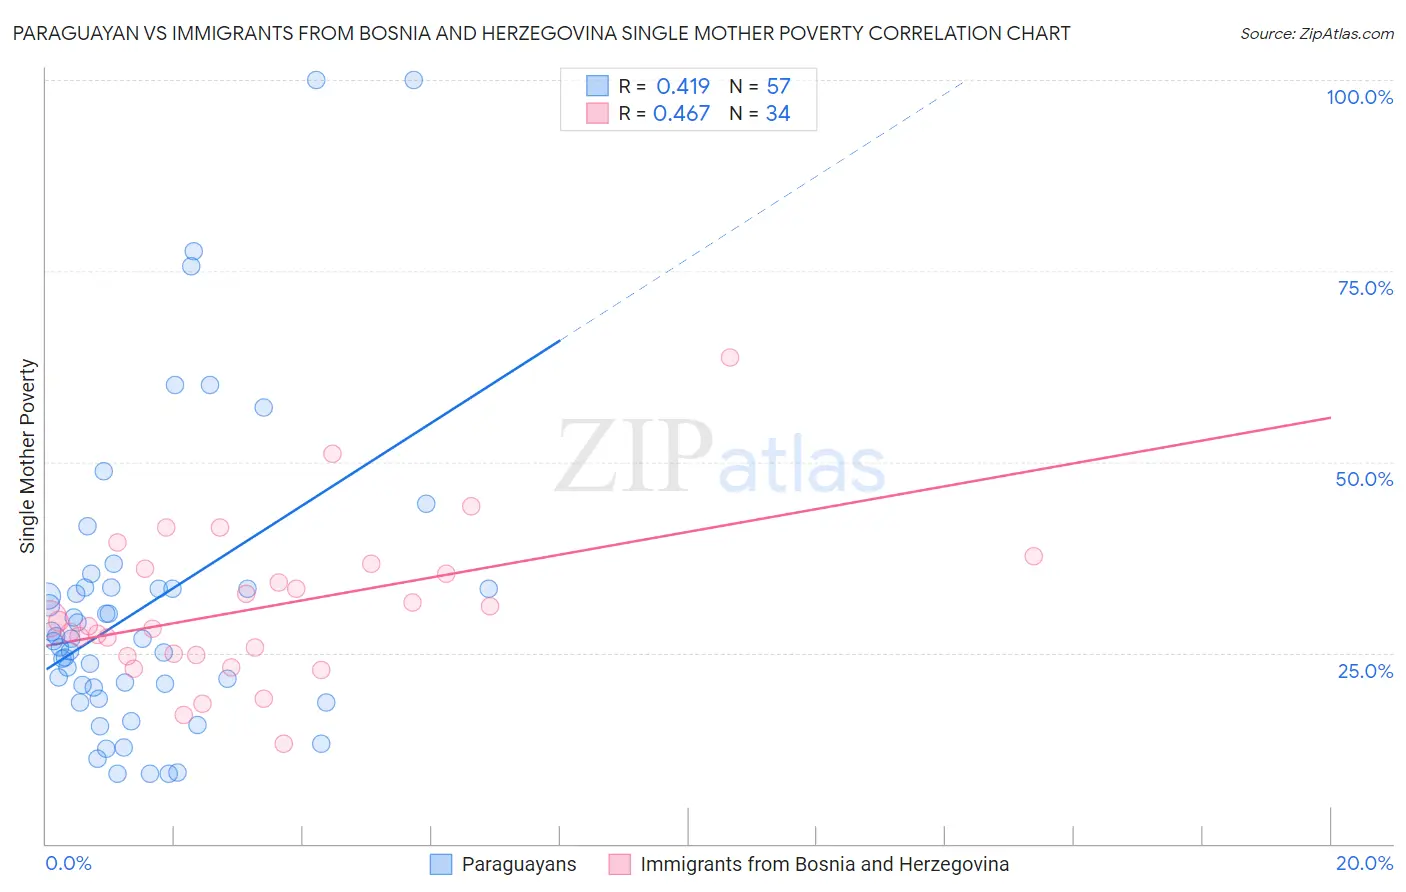 Paraguayan vs Immigrants from Bosnia and Herzegovina Single Mother Poverty